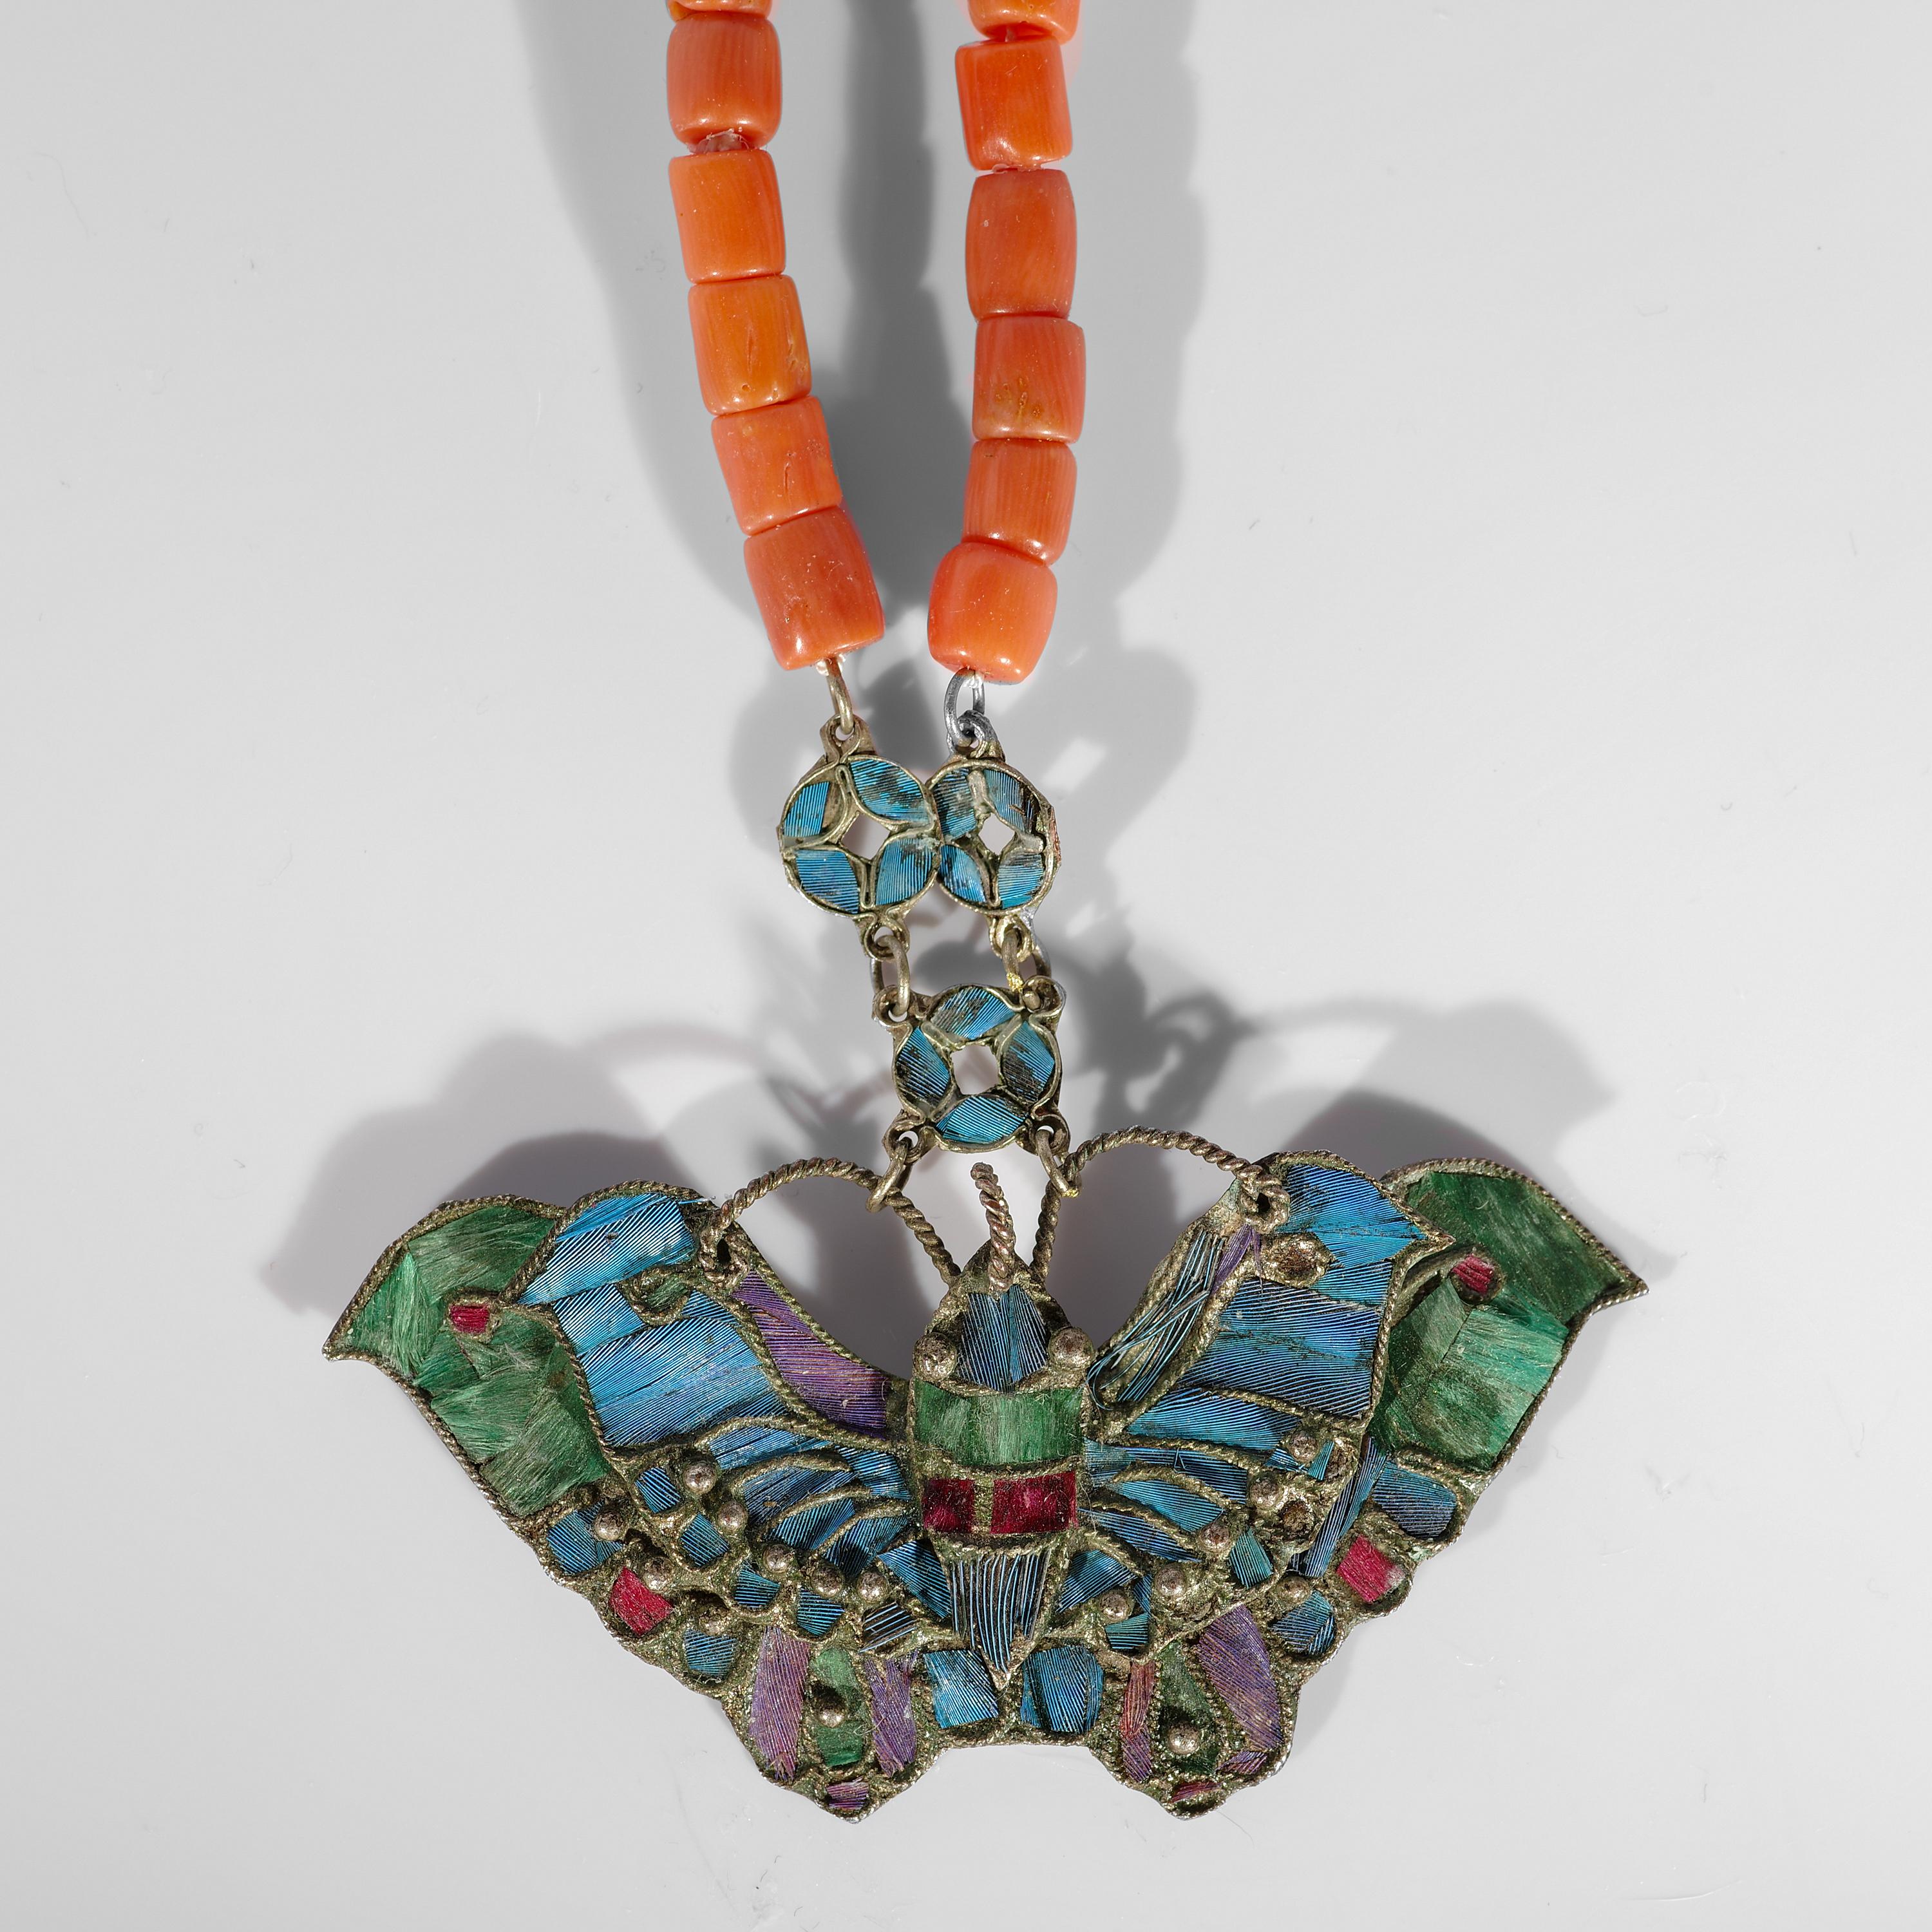 This strikingly unique necklace from the Art Nouveau-era is an elegant and impressive example of the Chinese art form known as tian-tsui. Tian-tsui refers to the decoration of metalwork with the azure, iridescent feathers of the Kingfisher bird. The